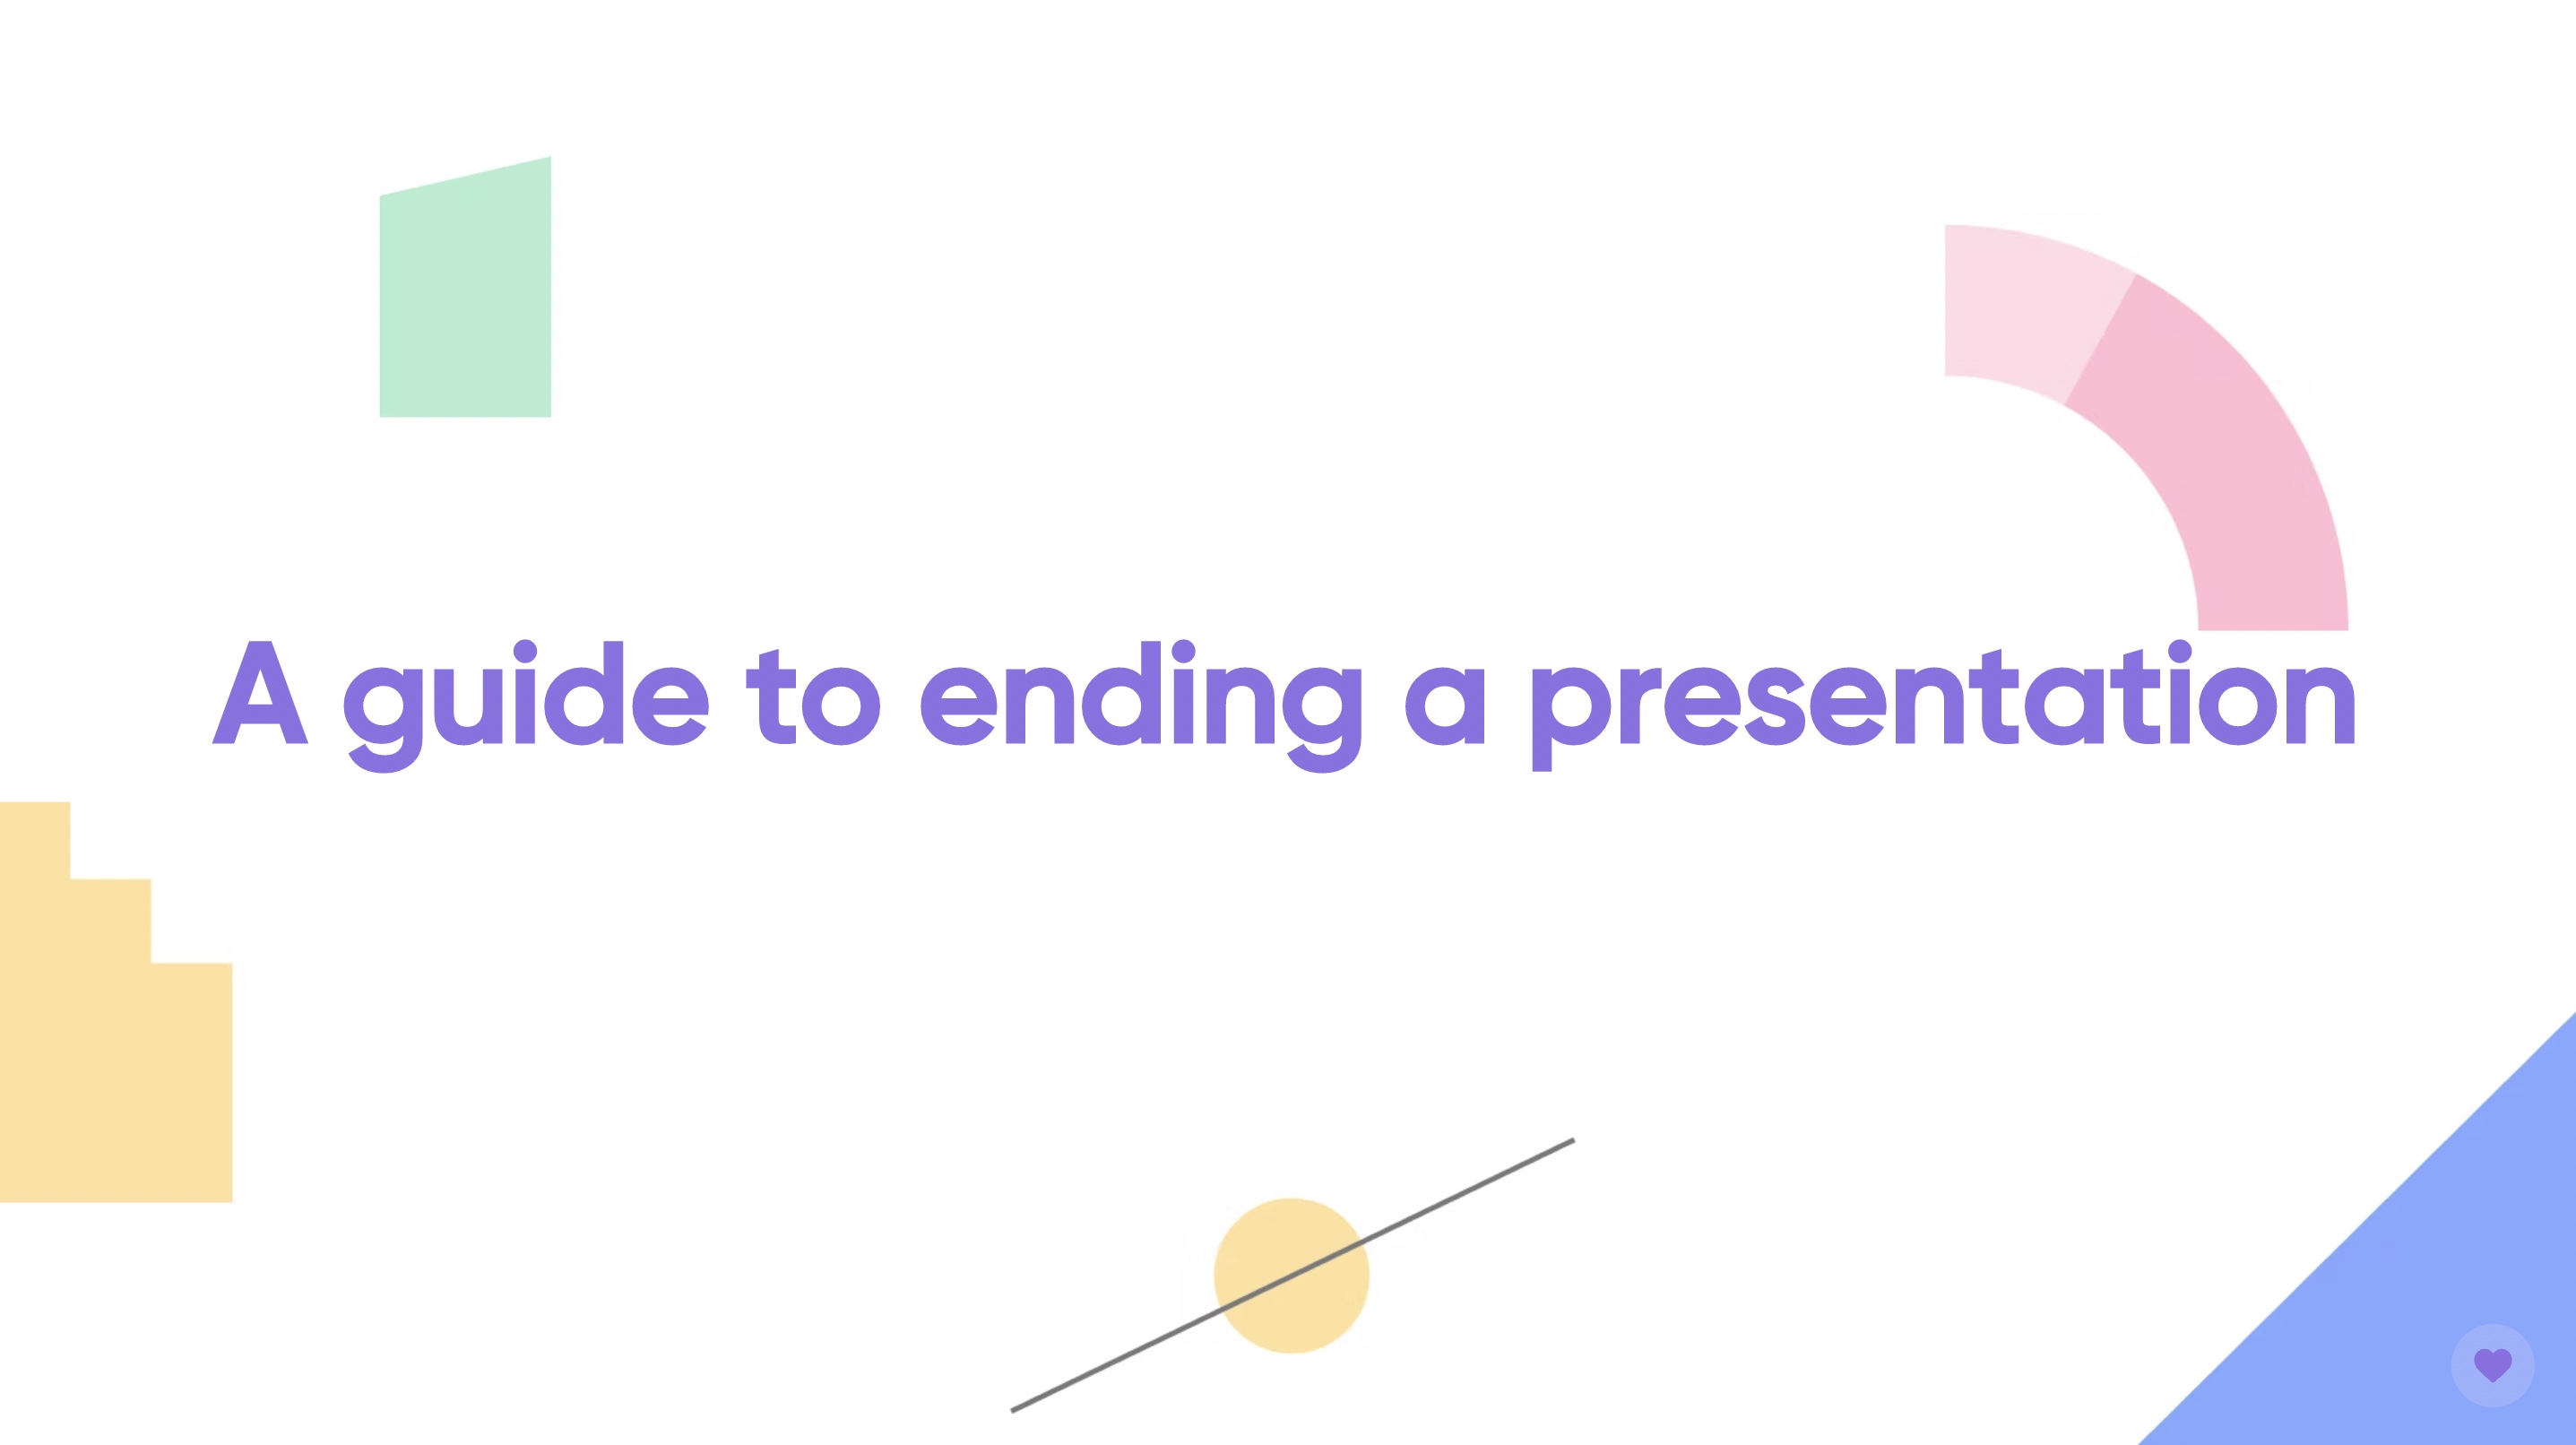 9 Ways to End a Presentation [Including Tools] - Mentimeter